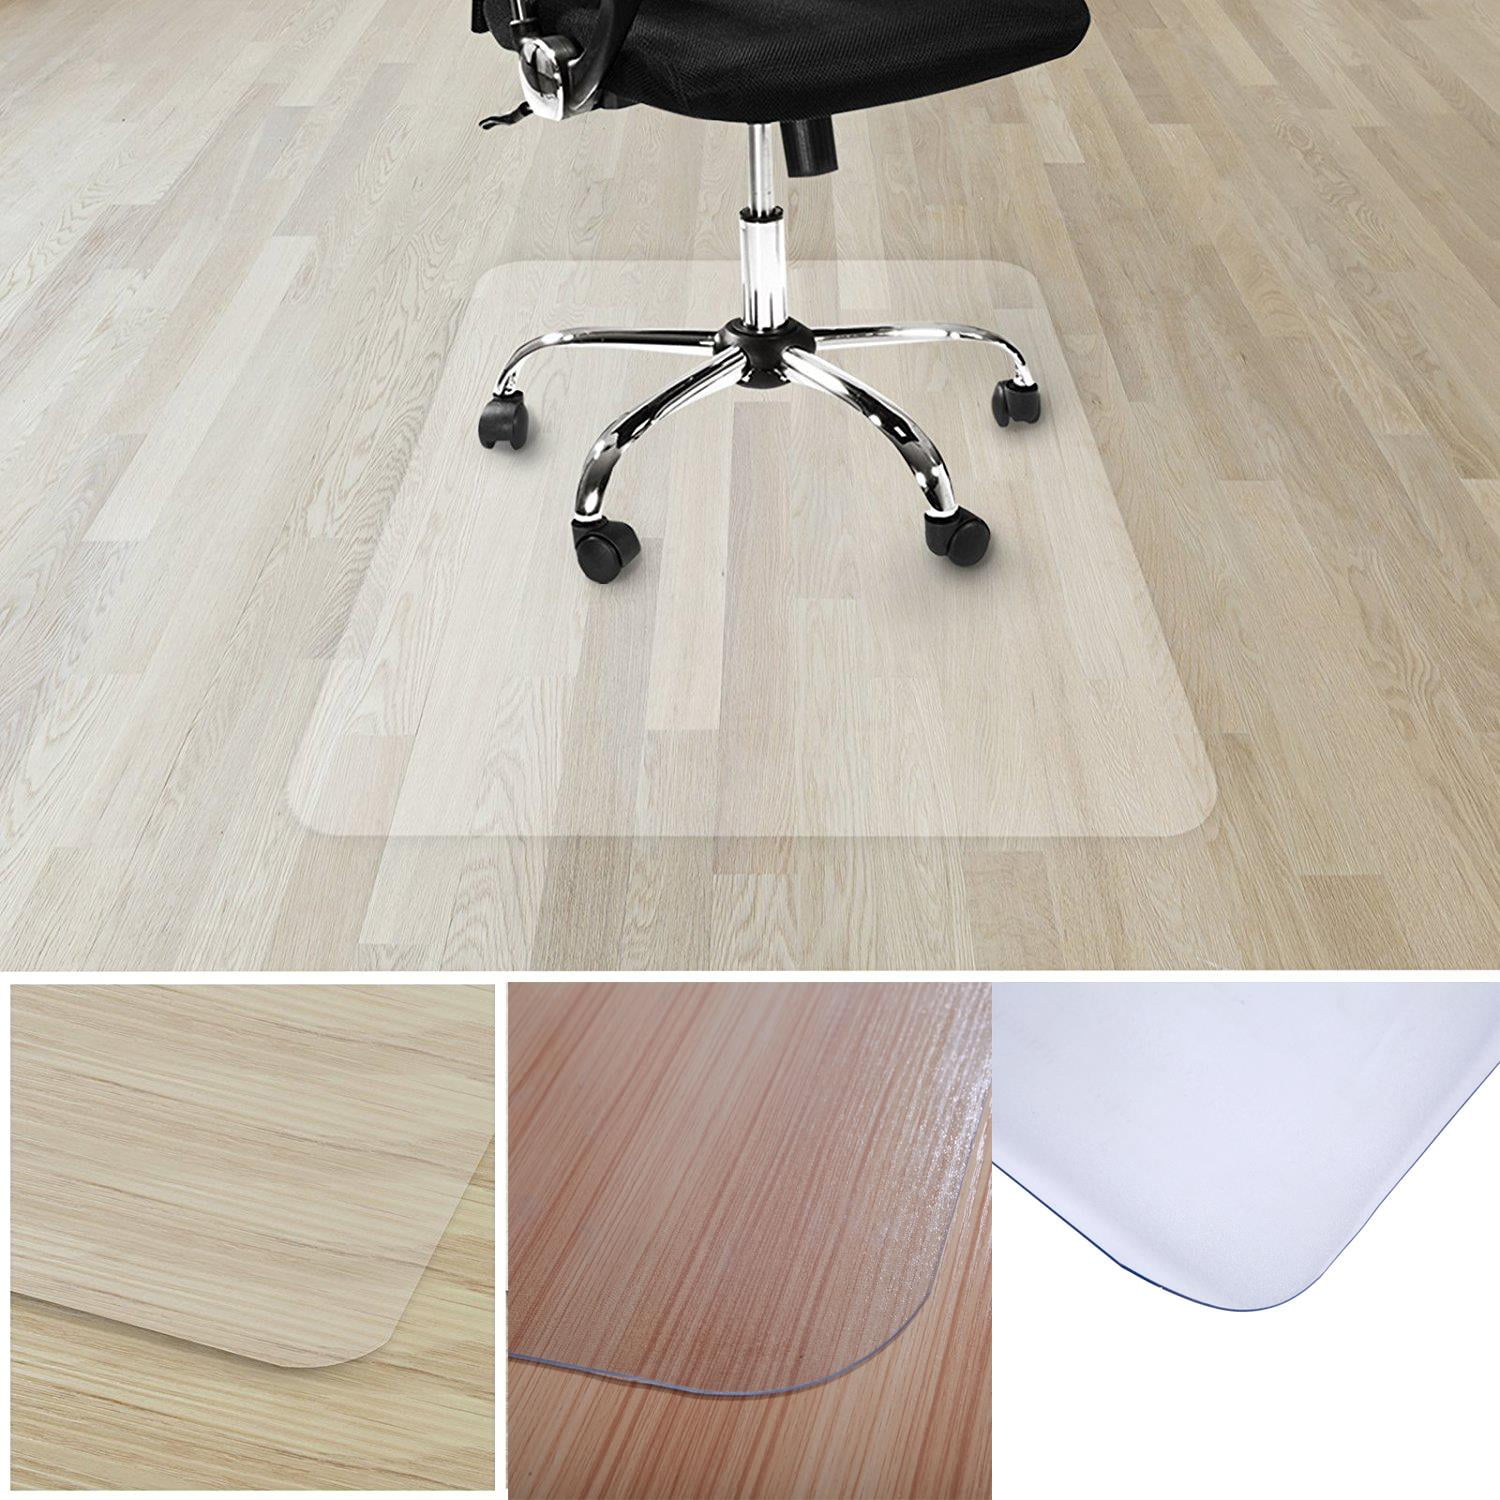 Hot PVC 48"x36" Chair Office Home Desk Mat for Wood Floors 48" x 36" Home New 